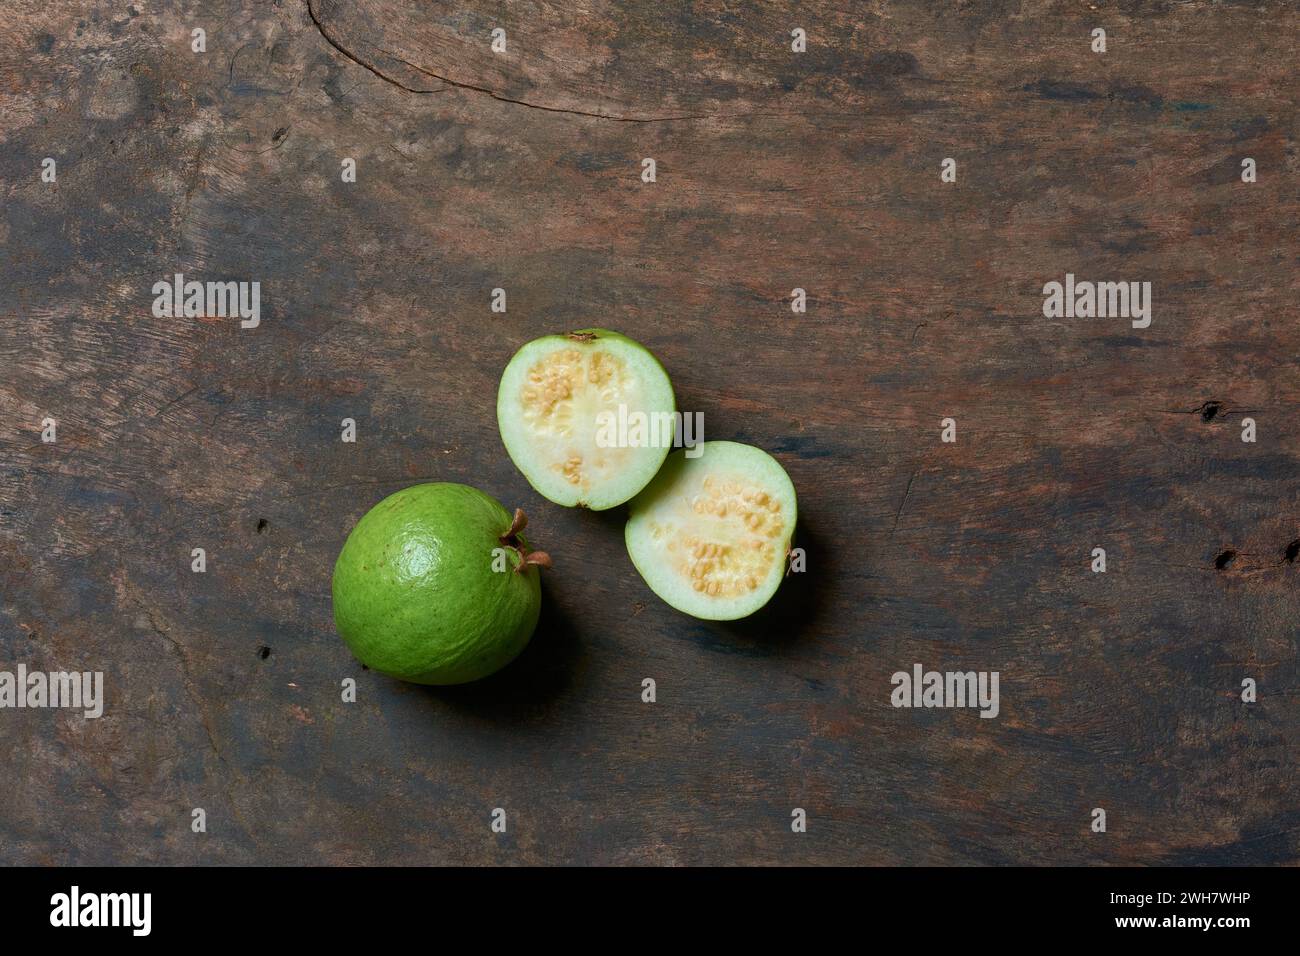 guava on wooden surface background, oval shaped common tropical and nutrient-rich fruit that is high in vitamin c, fiber and antioxidants Stock Photo